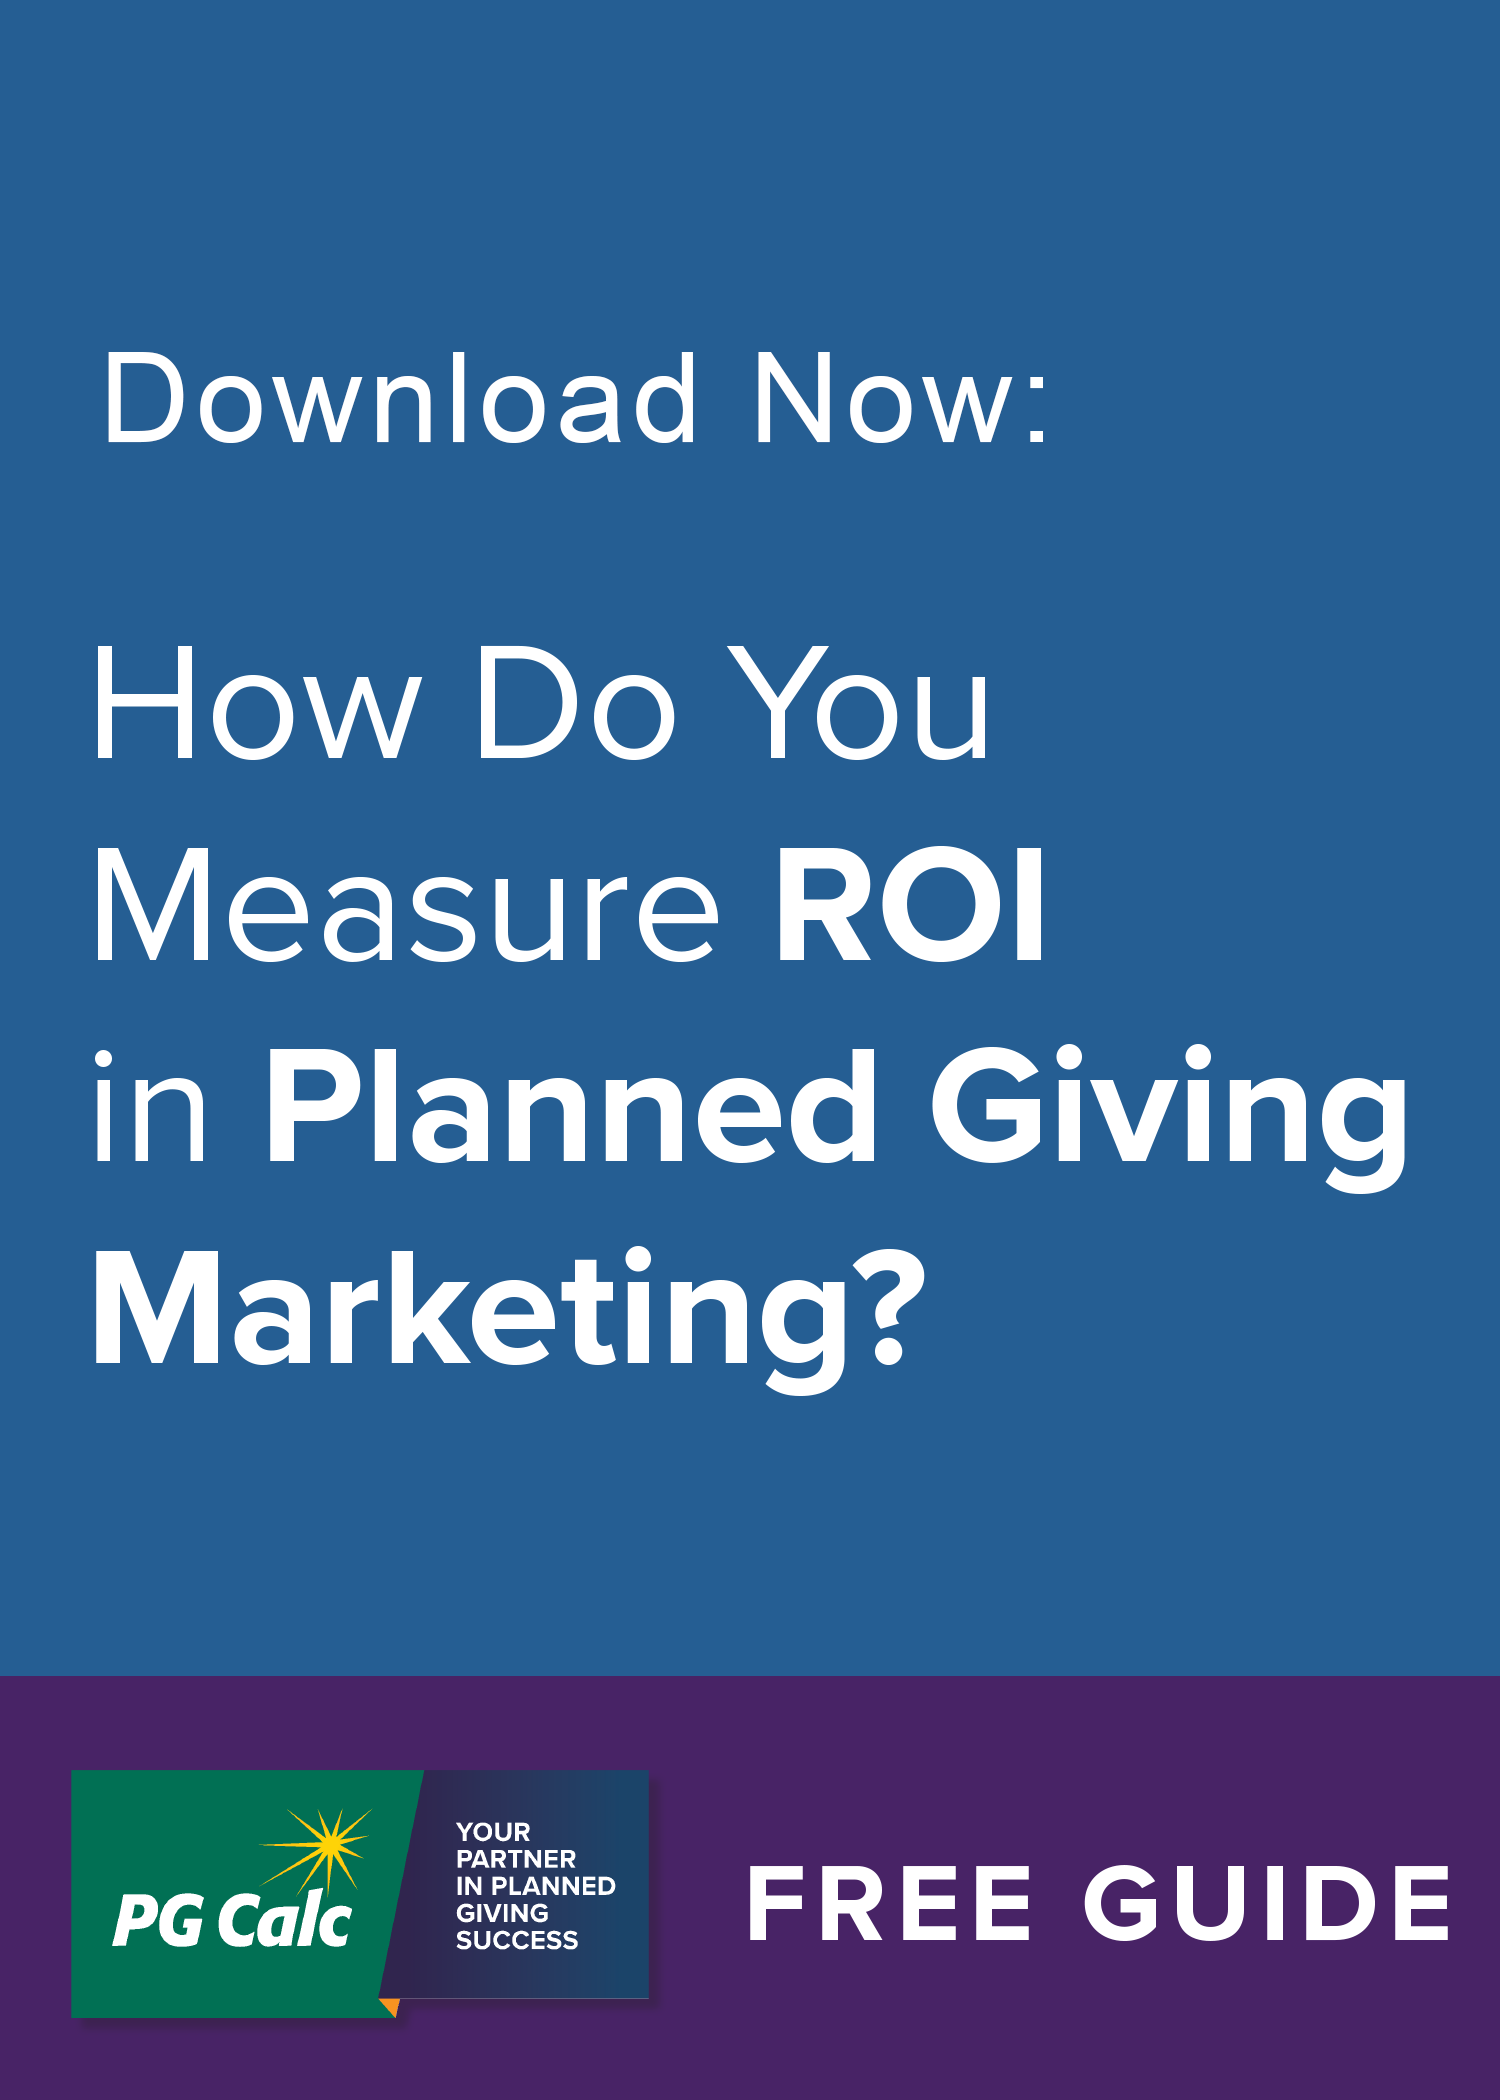 How do you measure ROI in planned giving marketing?